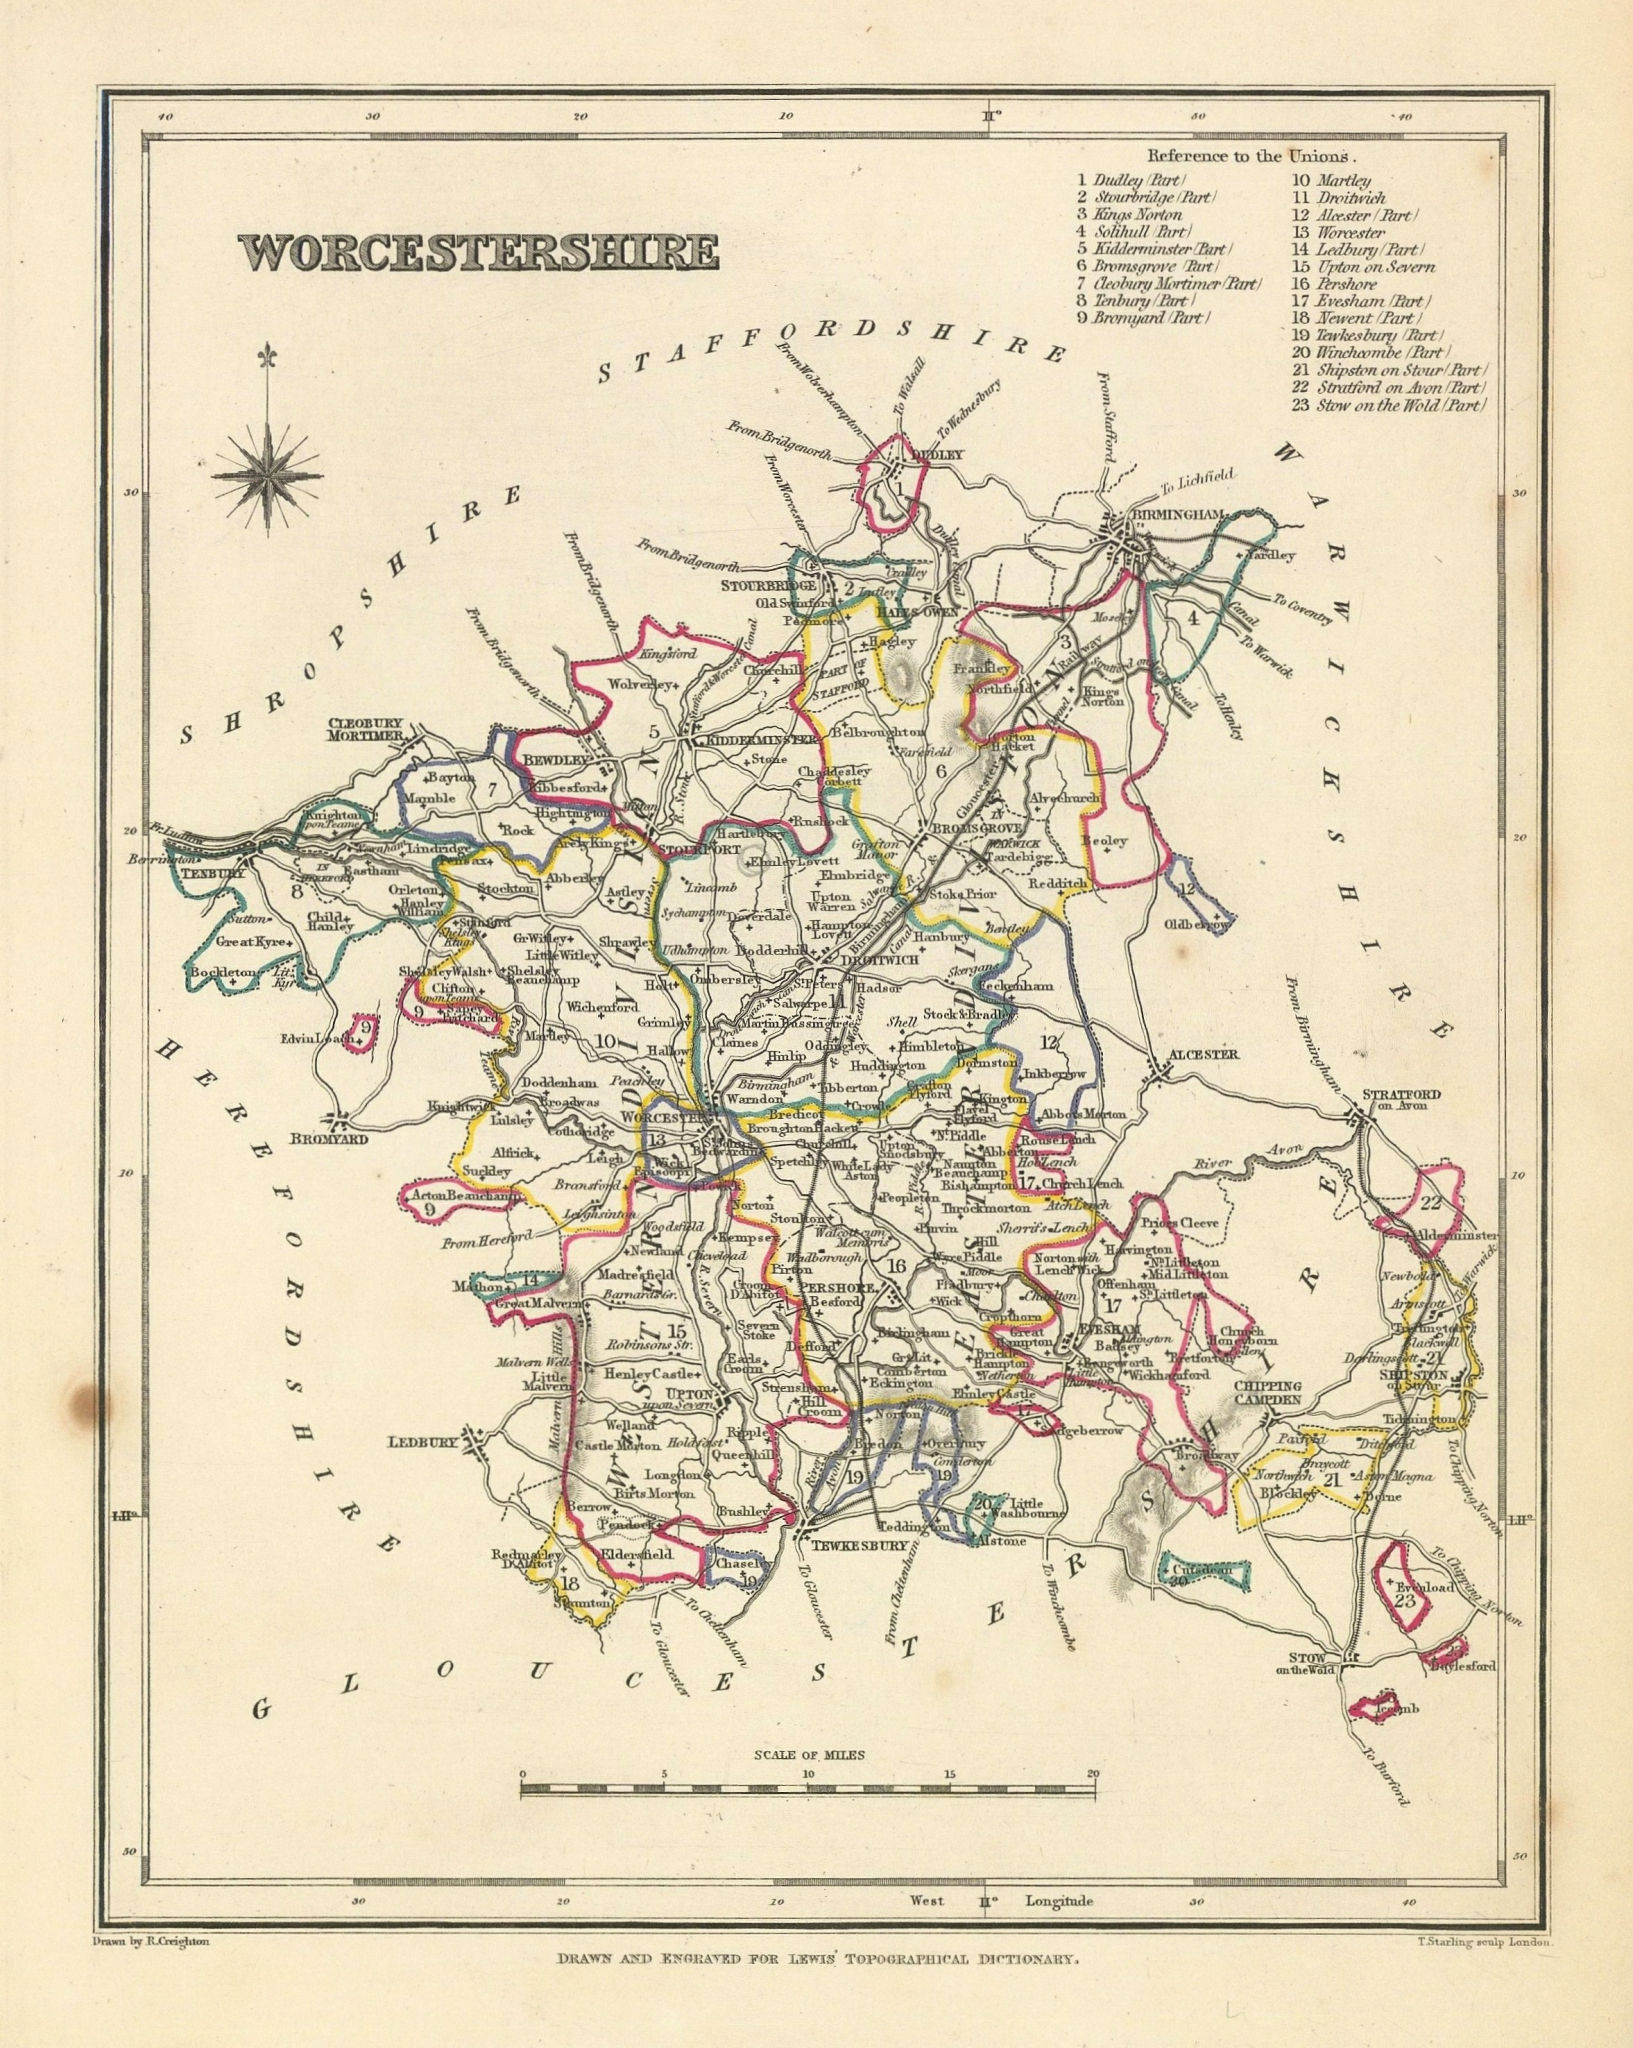 Associate Product Antique county map of WESTMORLAND by Creighton Walker Lewis. Lake District c1840